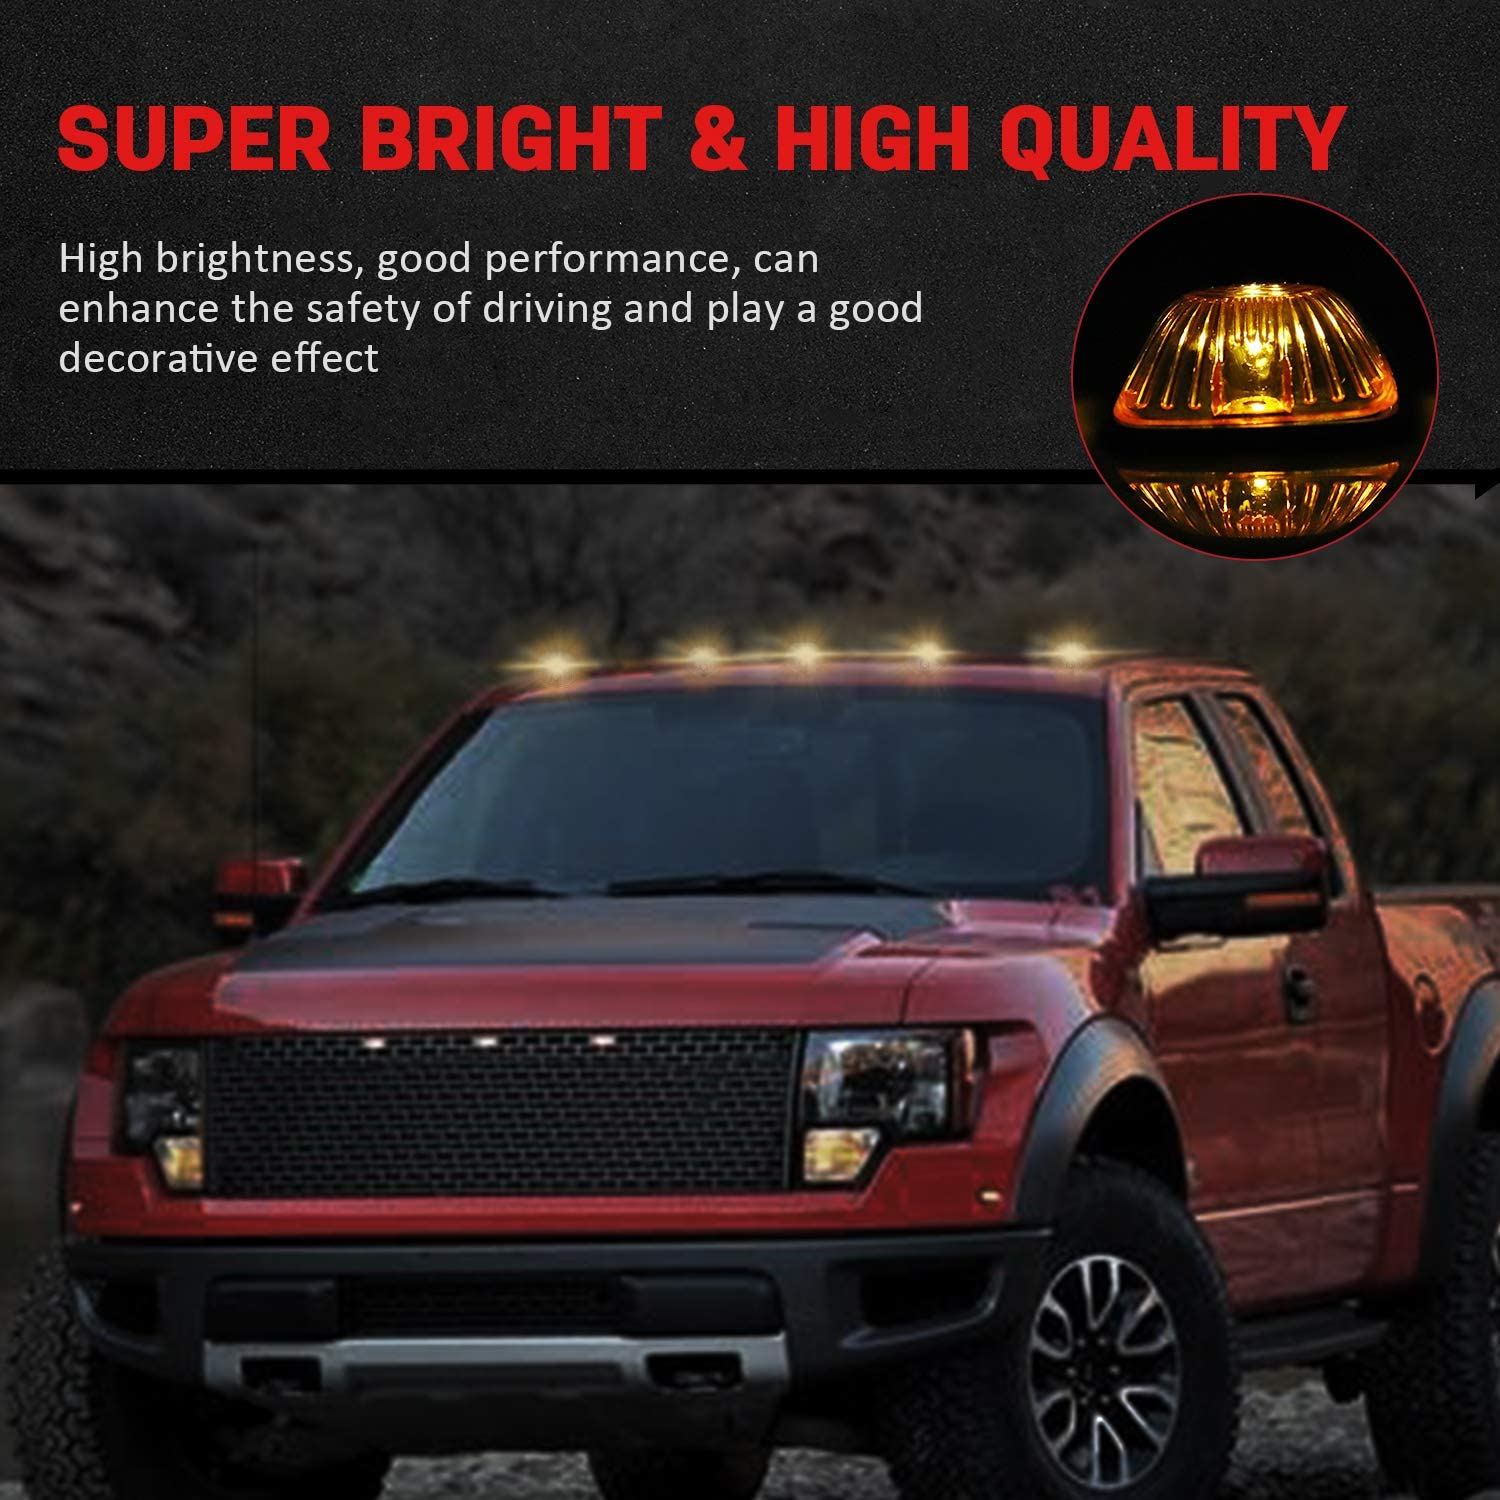 5pcs Amber Cab Marker Light Cover and White T10 6SMD 5730 Chips LED Bulb w/Base Housing for 1995-2000 Chevrolet/GMC C2500 C3500